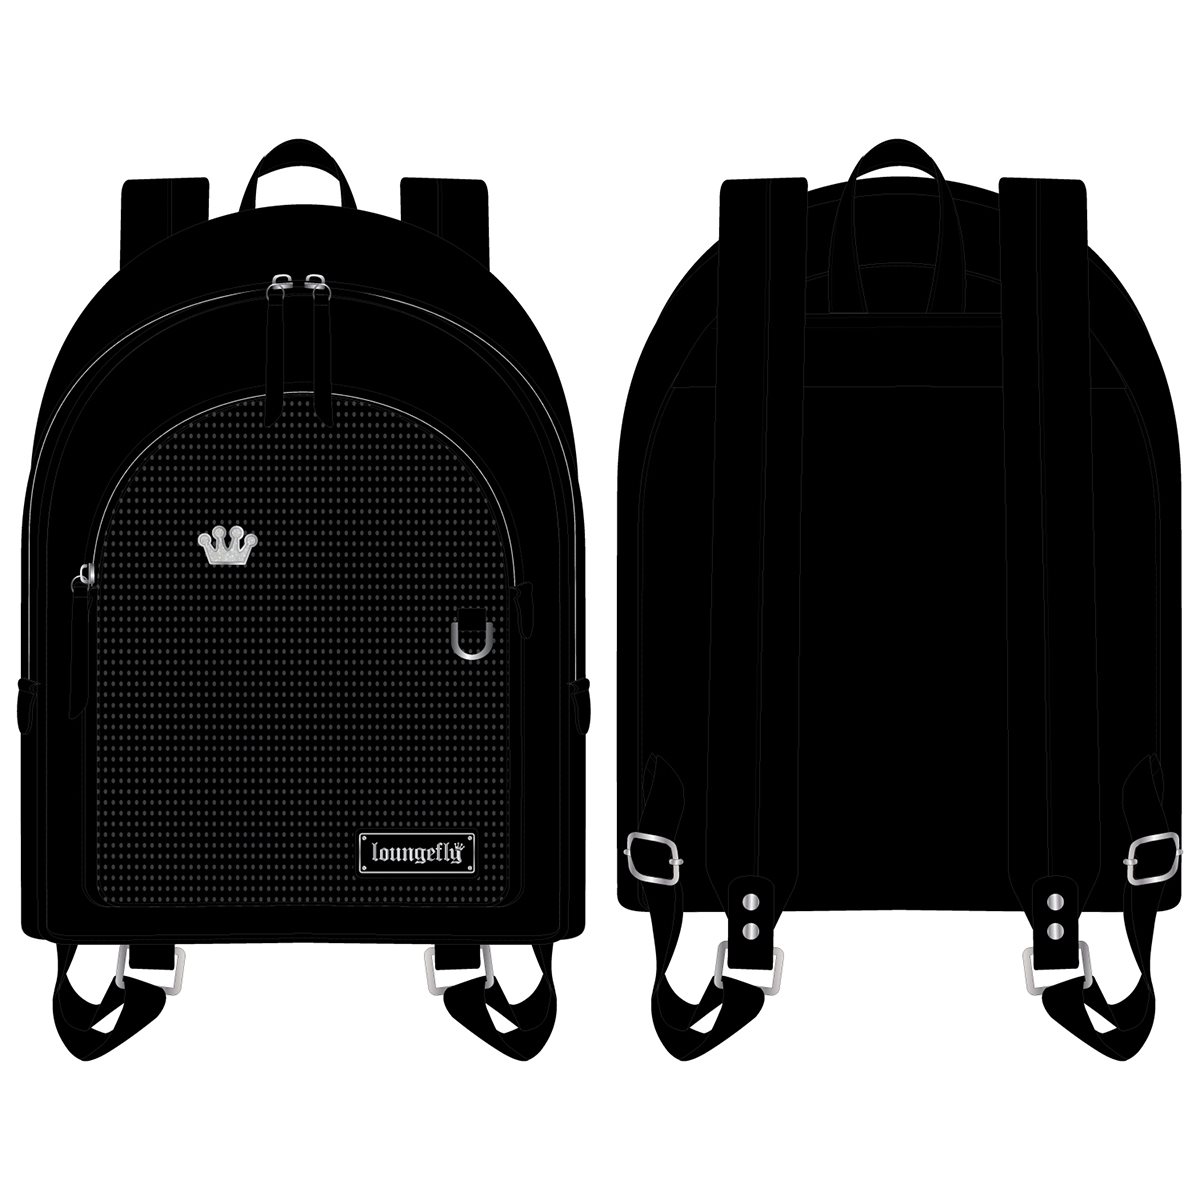 Pin on Small Black Backpack Purses